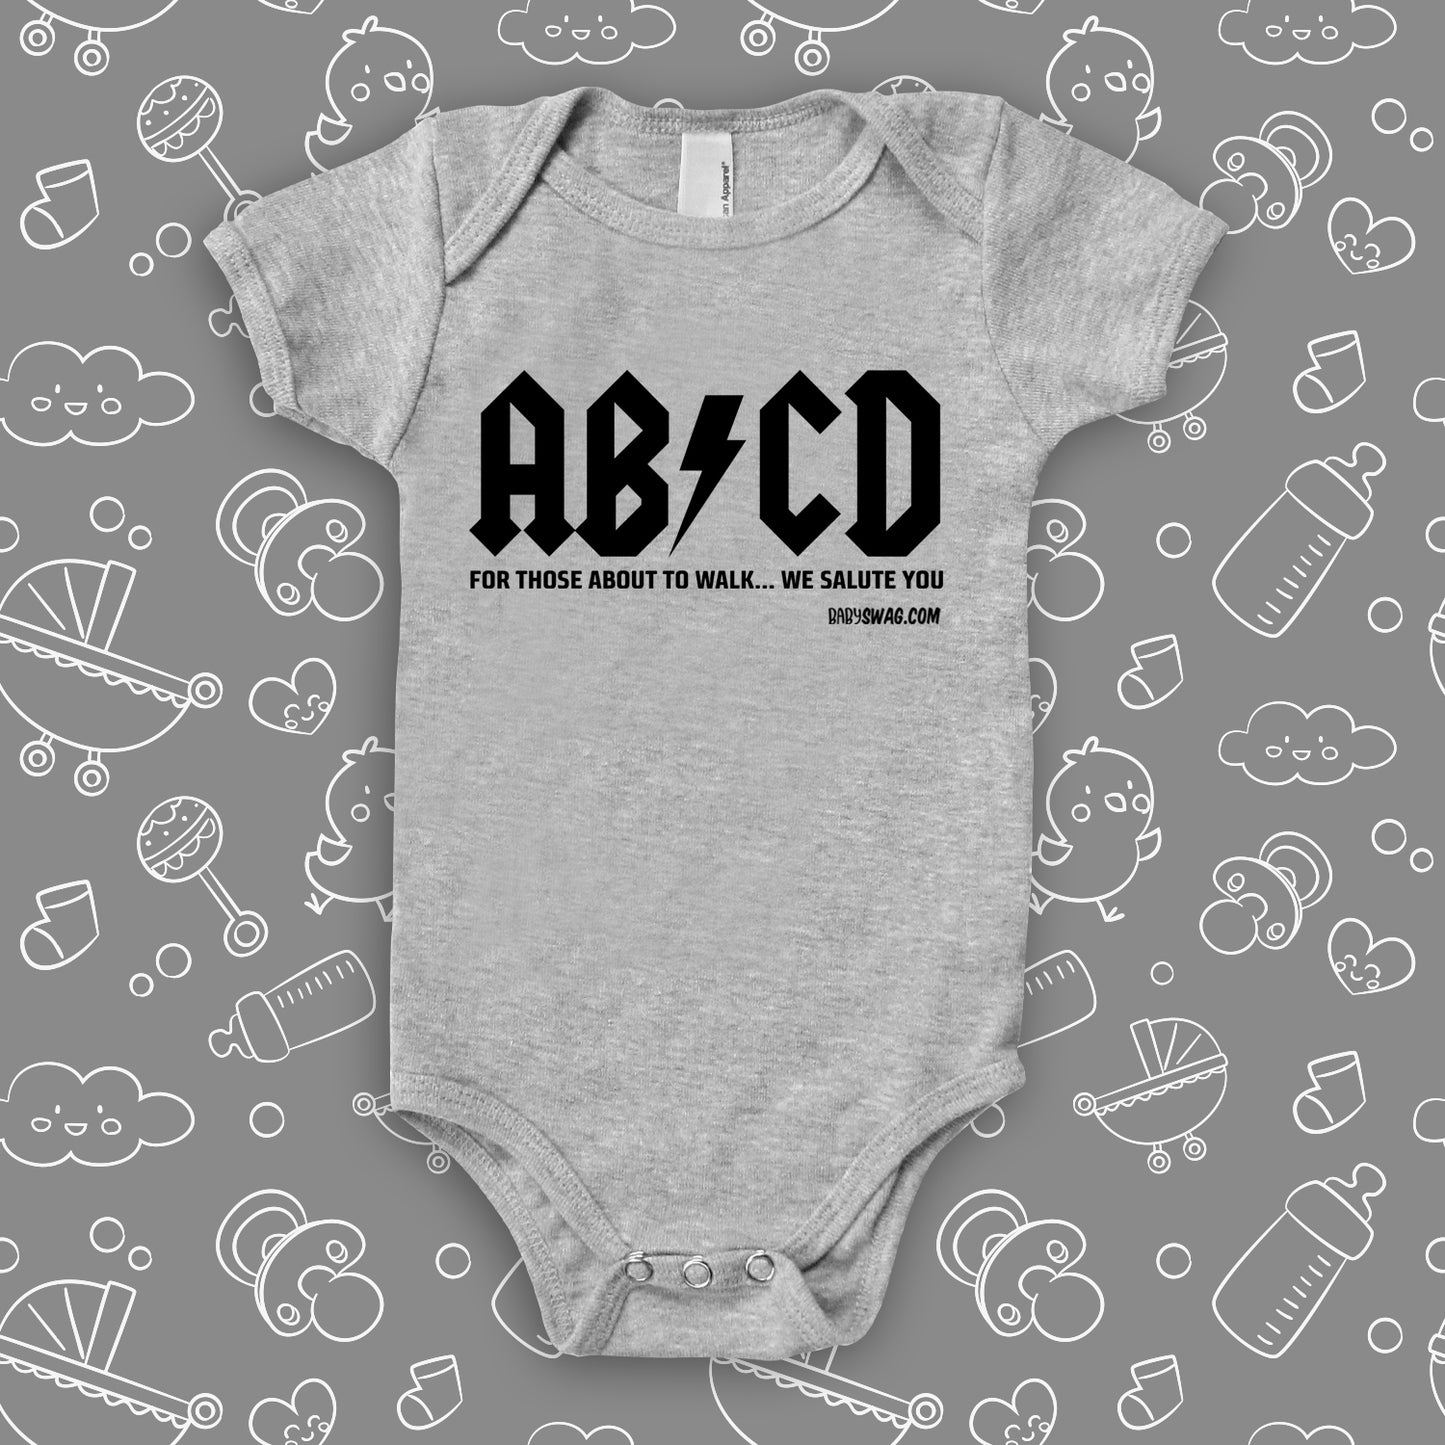 The rock n roll onesies with saying "ABCD" in grey